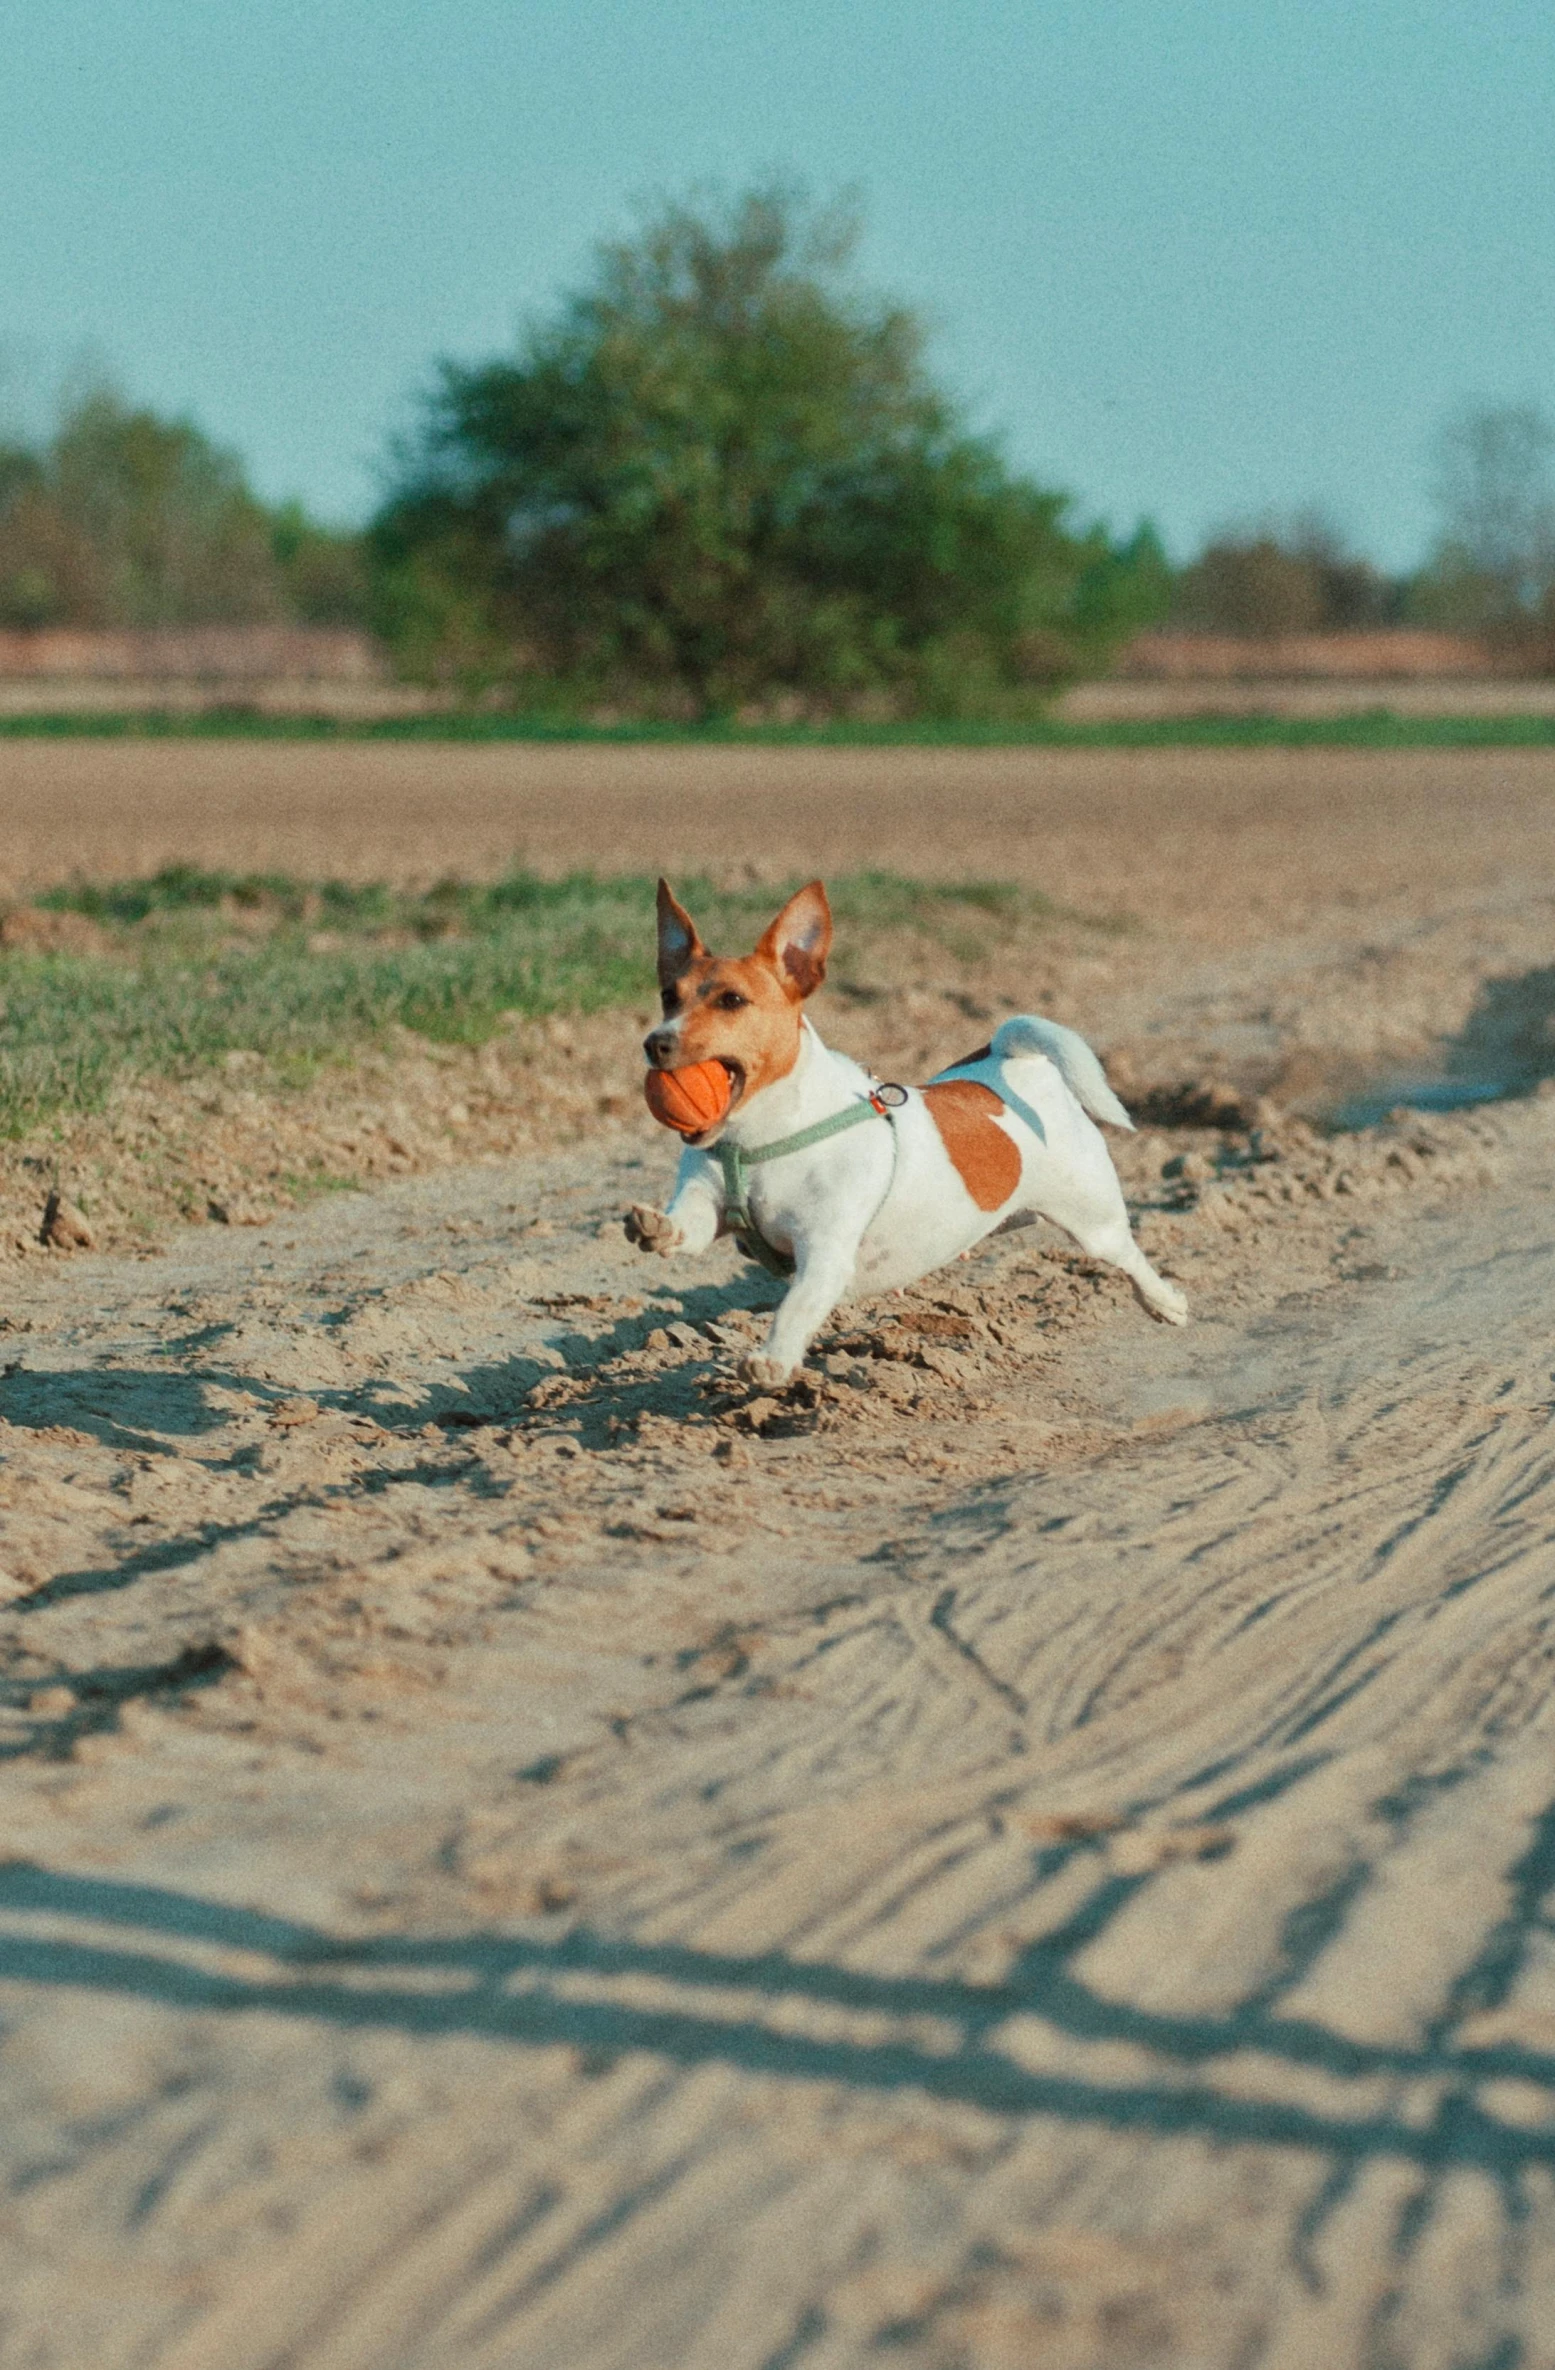 a brown and white dog is running on the dirt